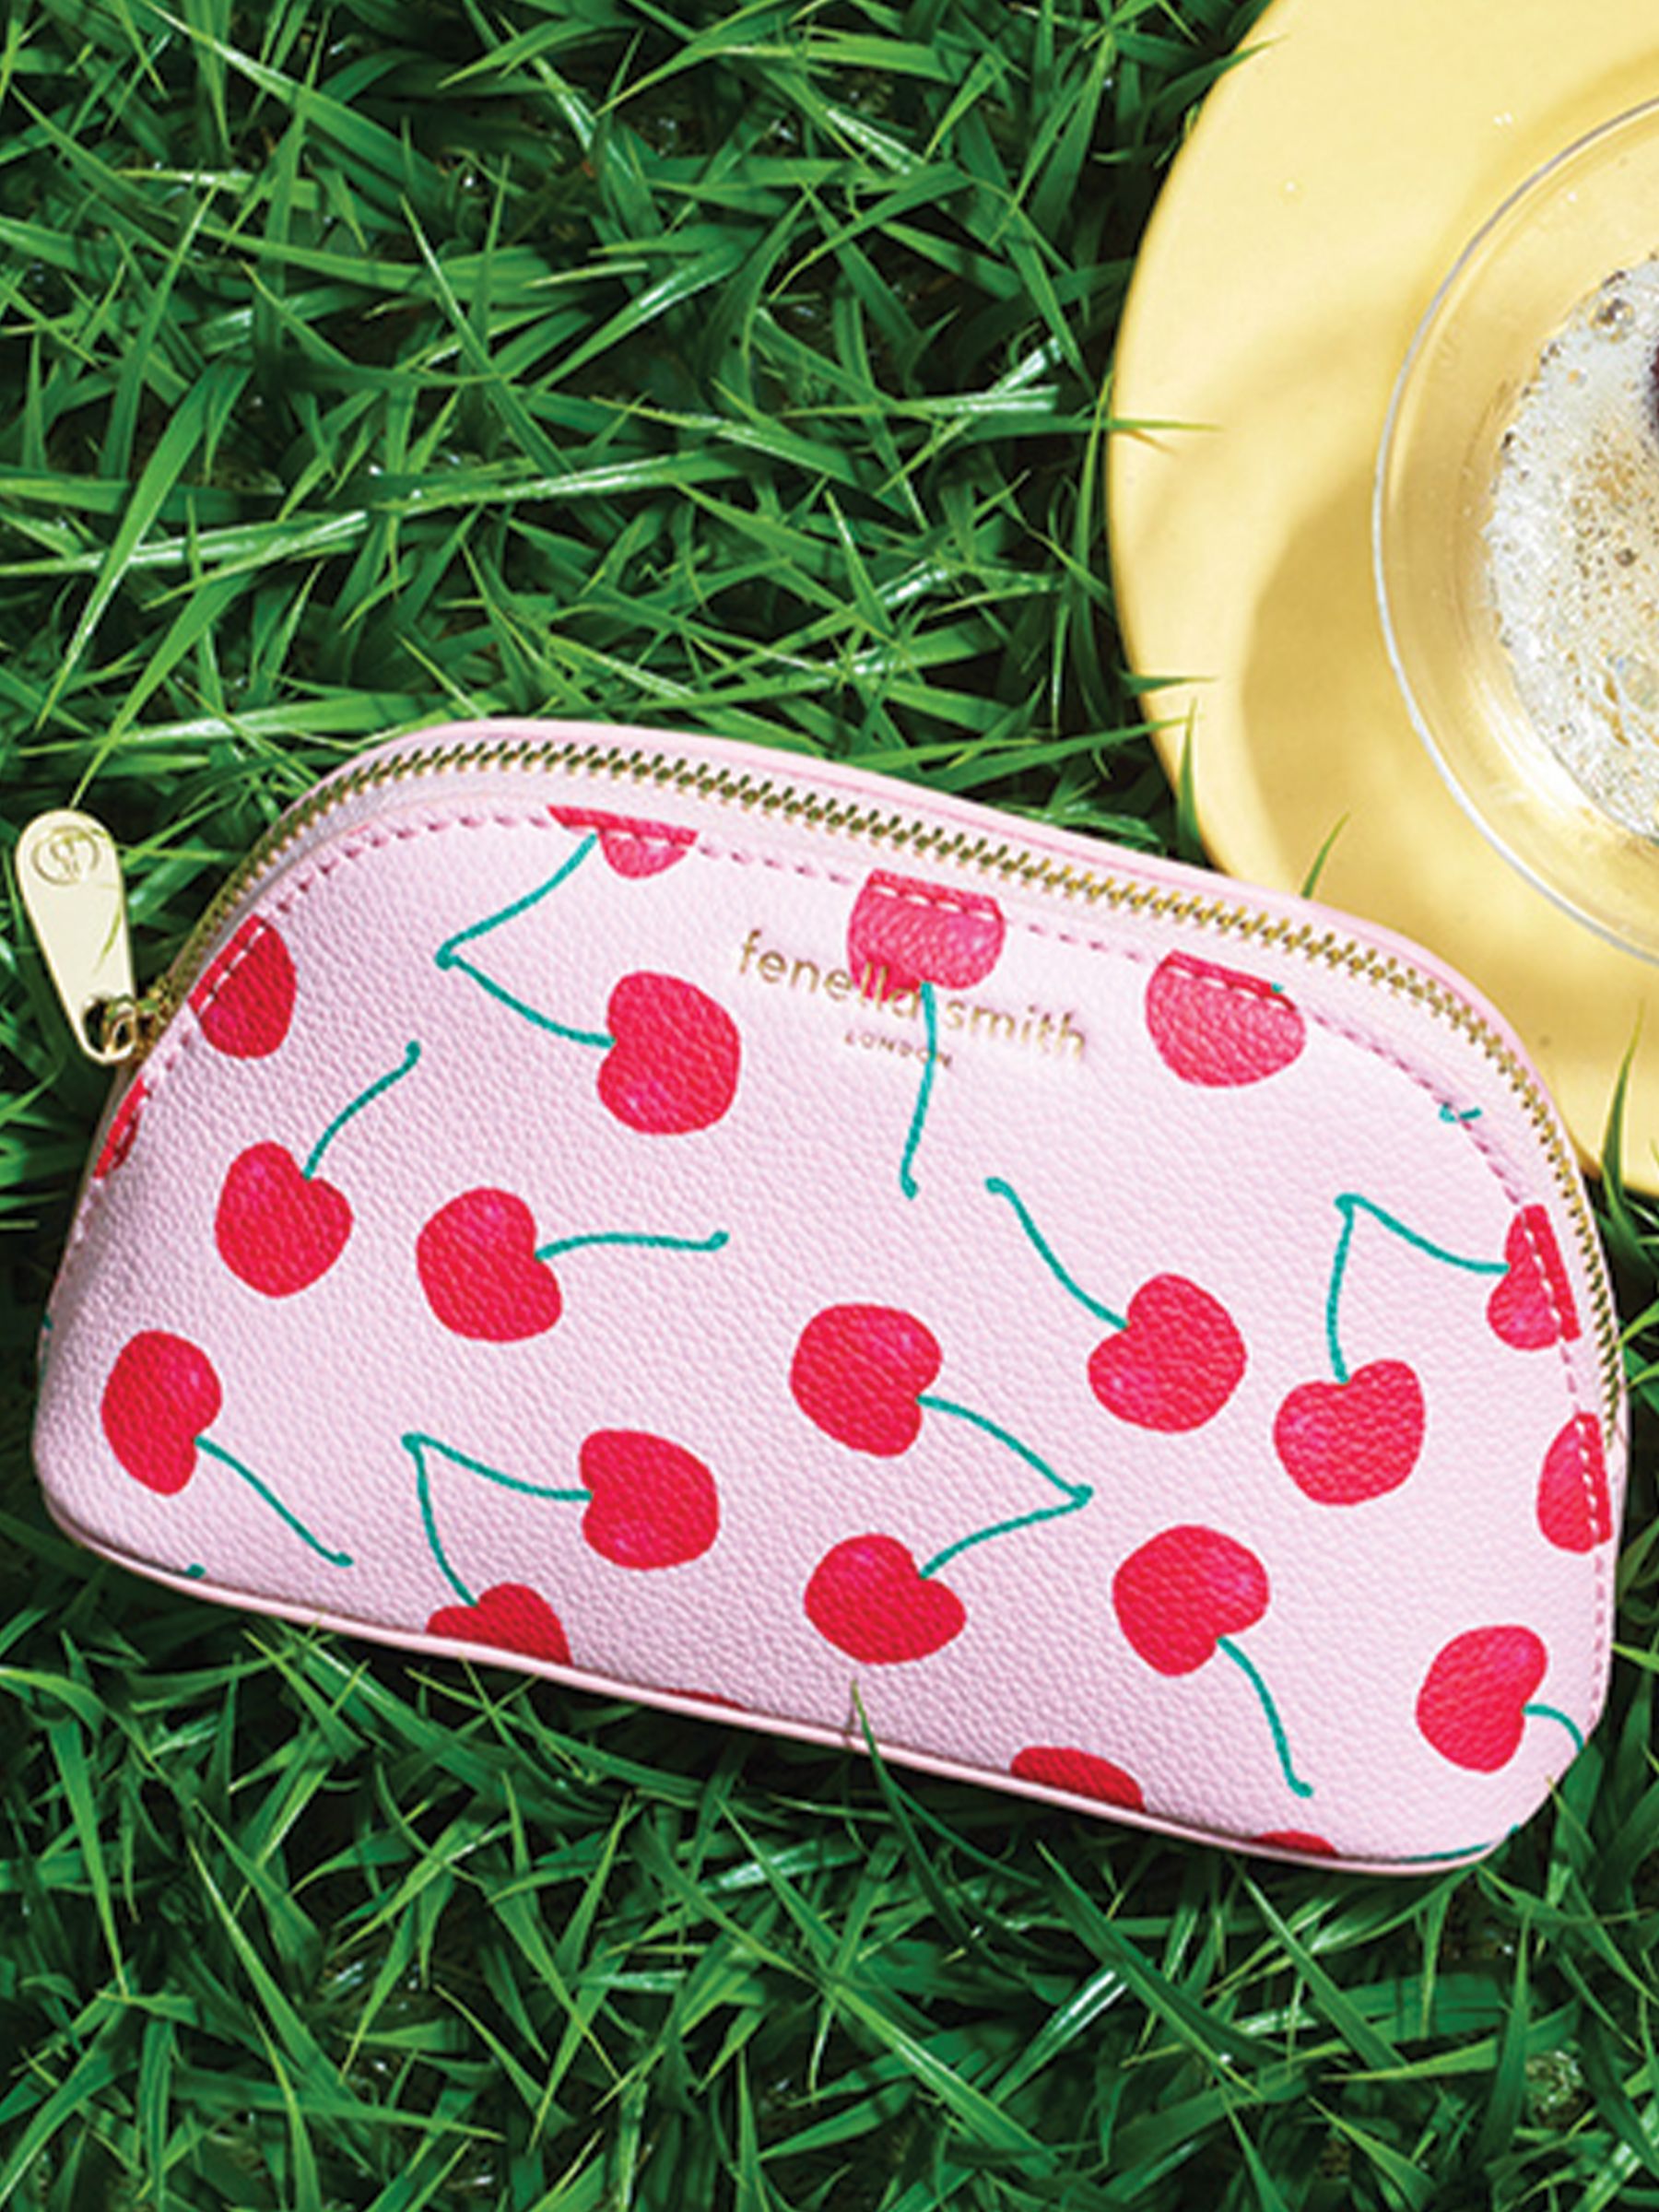 Fenella Smith Cherries Recycled Make Up Bag, Pink 3